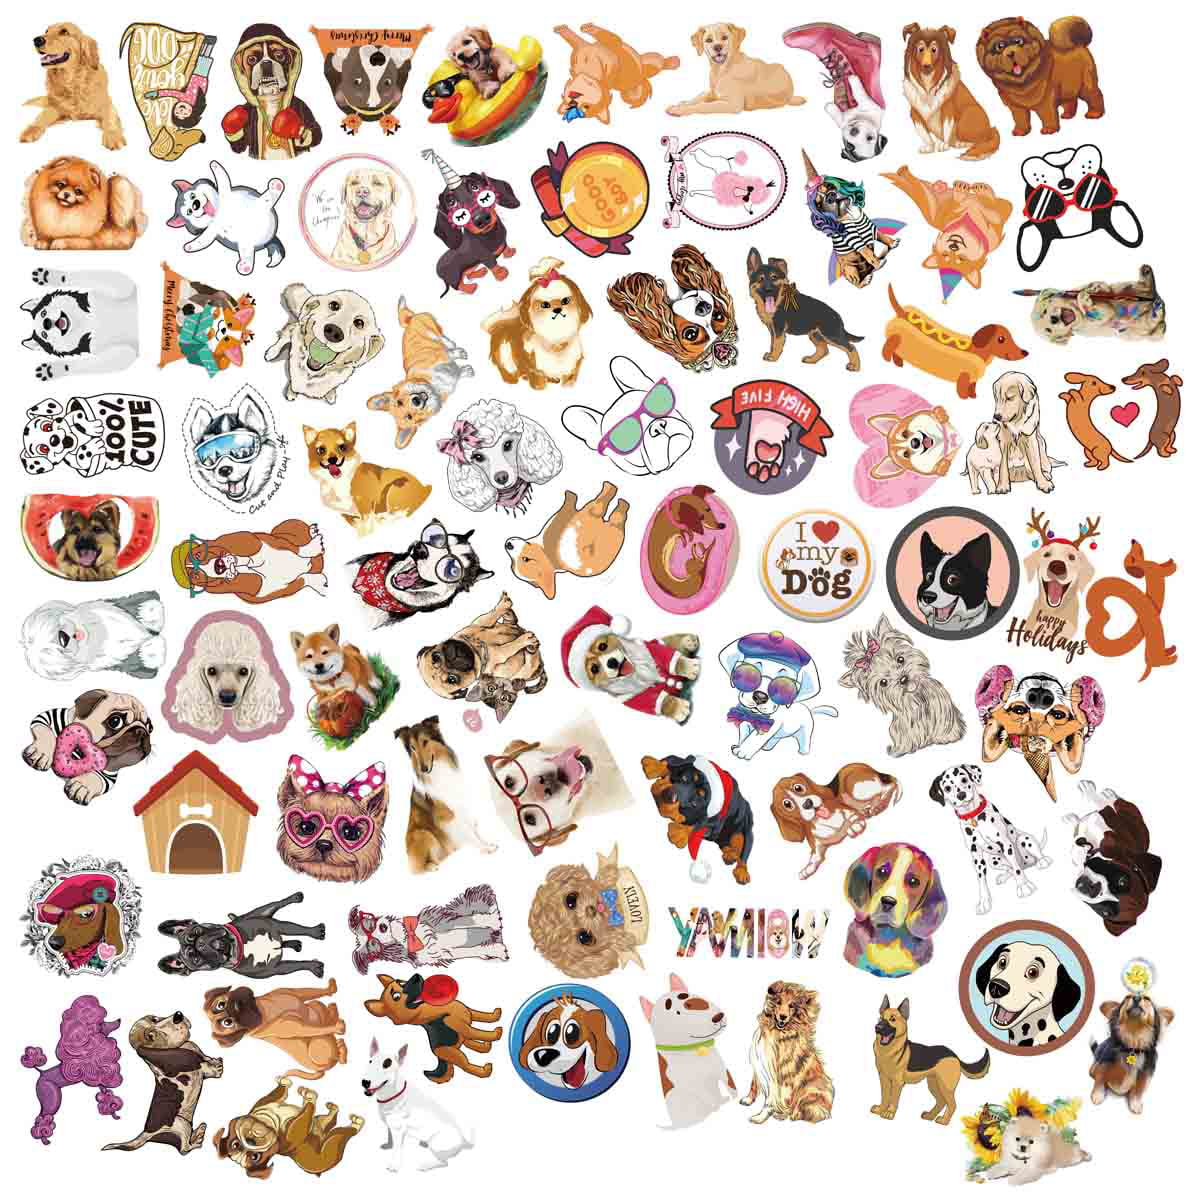 LIFEBE 150 PCS Cute Dog Stickers,Funny Dog Stickers for Kids Teens  Adults,Waterproof Dog Stickers for Water Bottles Luggage Laptop Skateboard